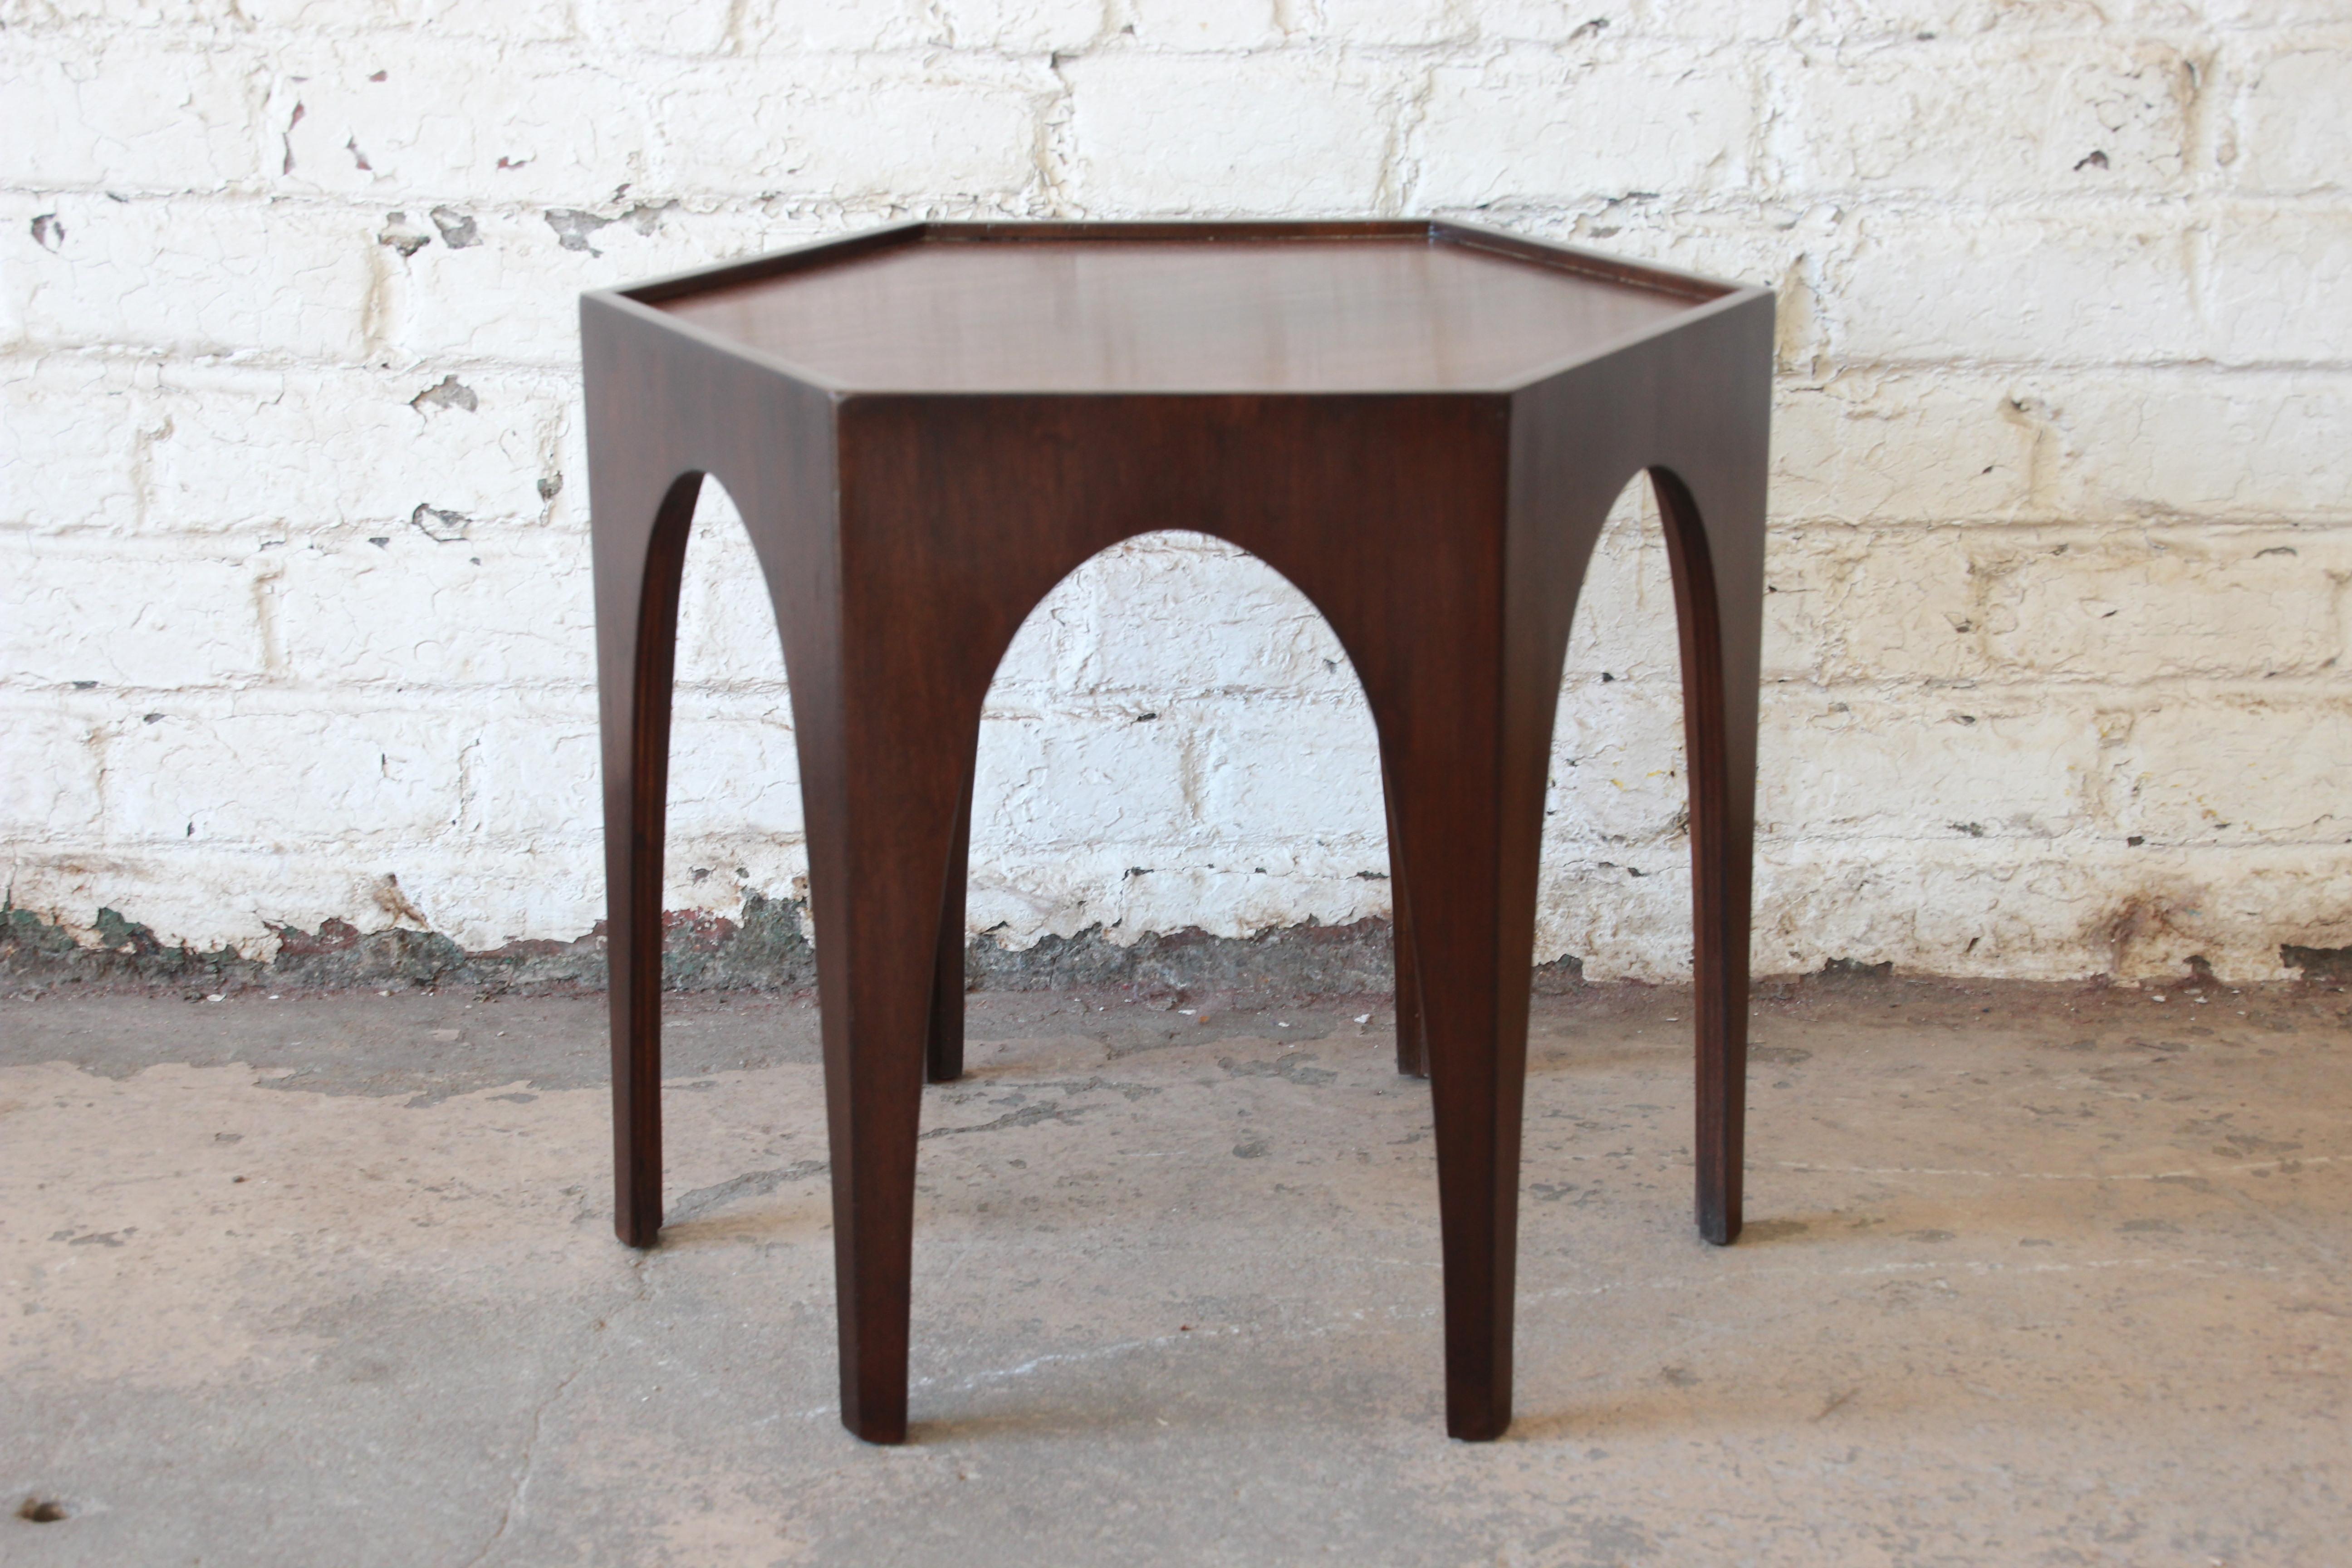 A gorgeous Mid-Century Modern hexagonal end or occasional table designed by Harvey Probber. The table features beautiful walnut wood grain and is sculpted with Moroccan-inspired arches. It is finished on all sides and could also be used as a plant